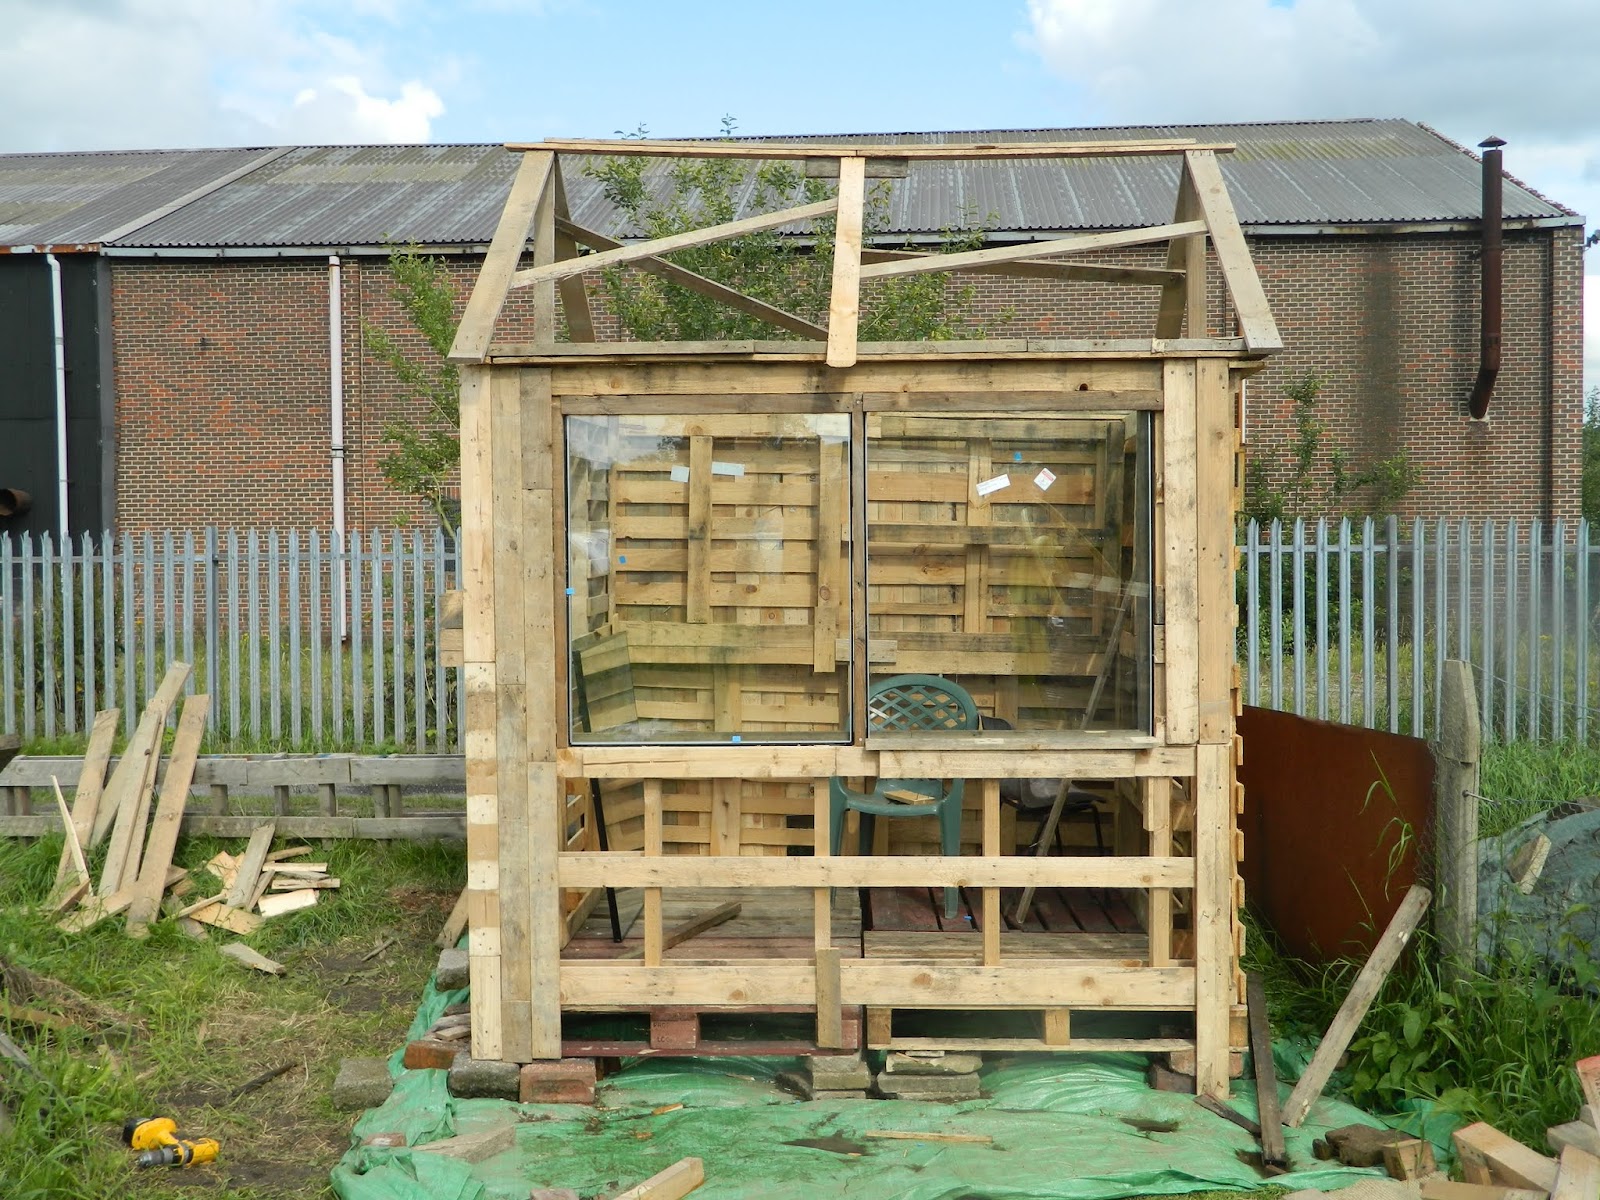 the pallet shed, workshop/studio northumberland owned by